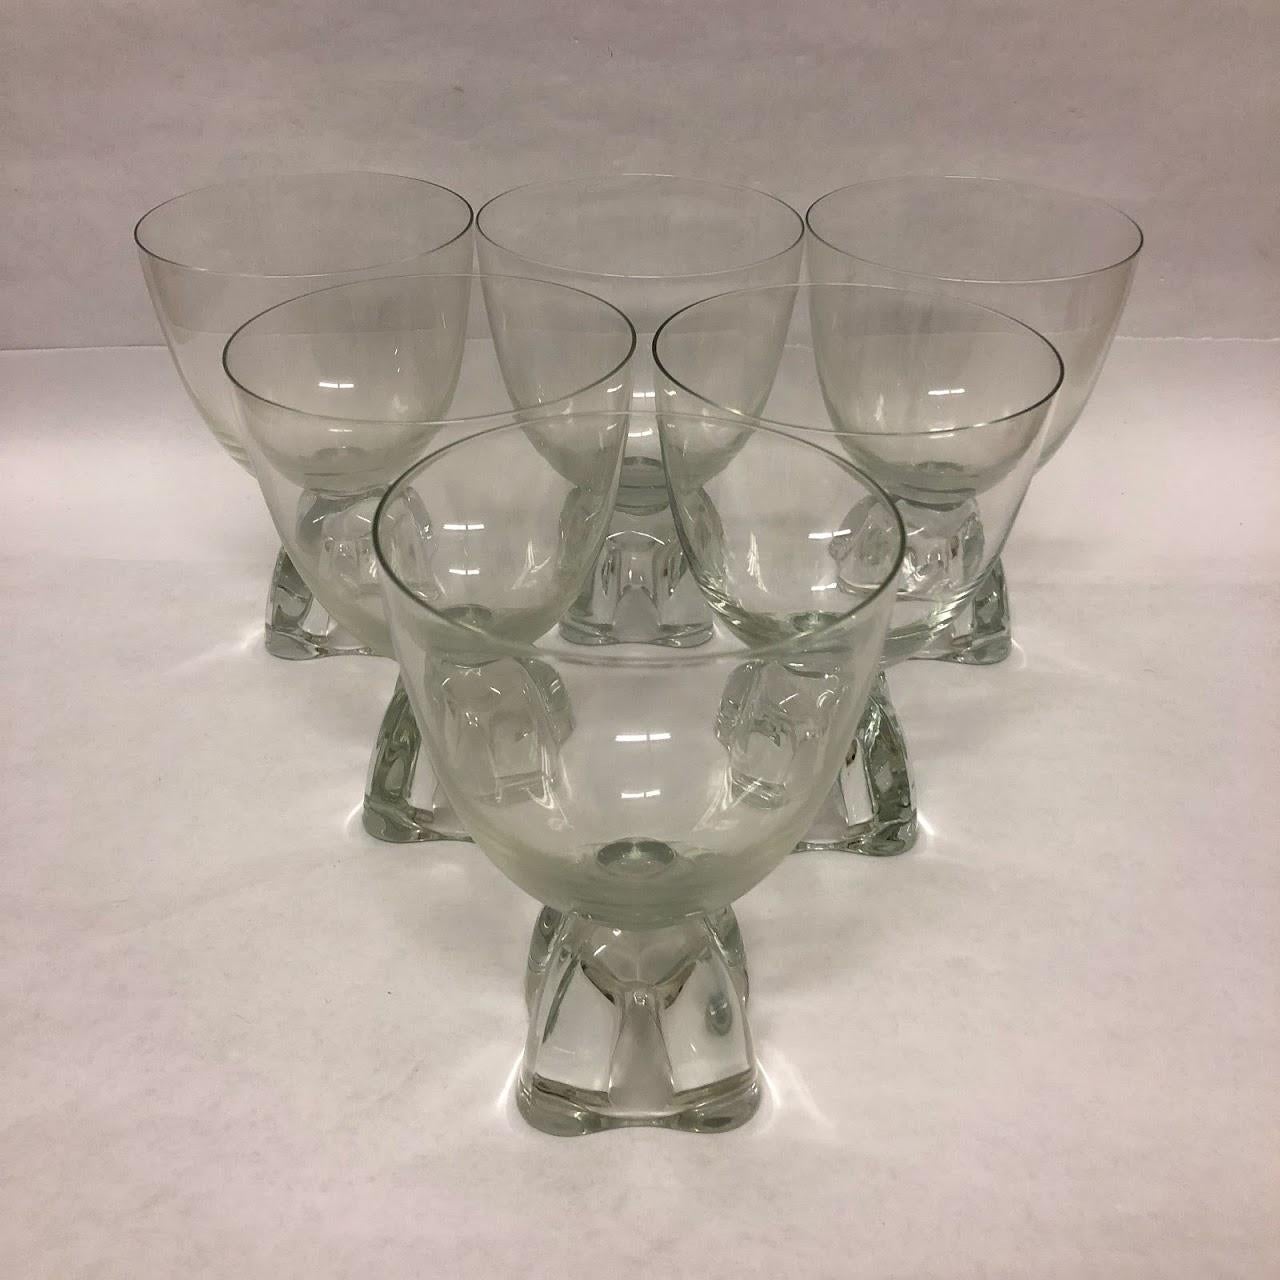 A set of six midcentury Fostoria glass water goblets.